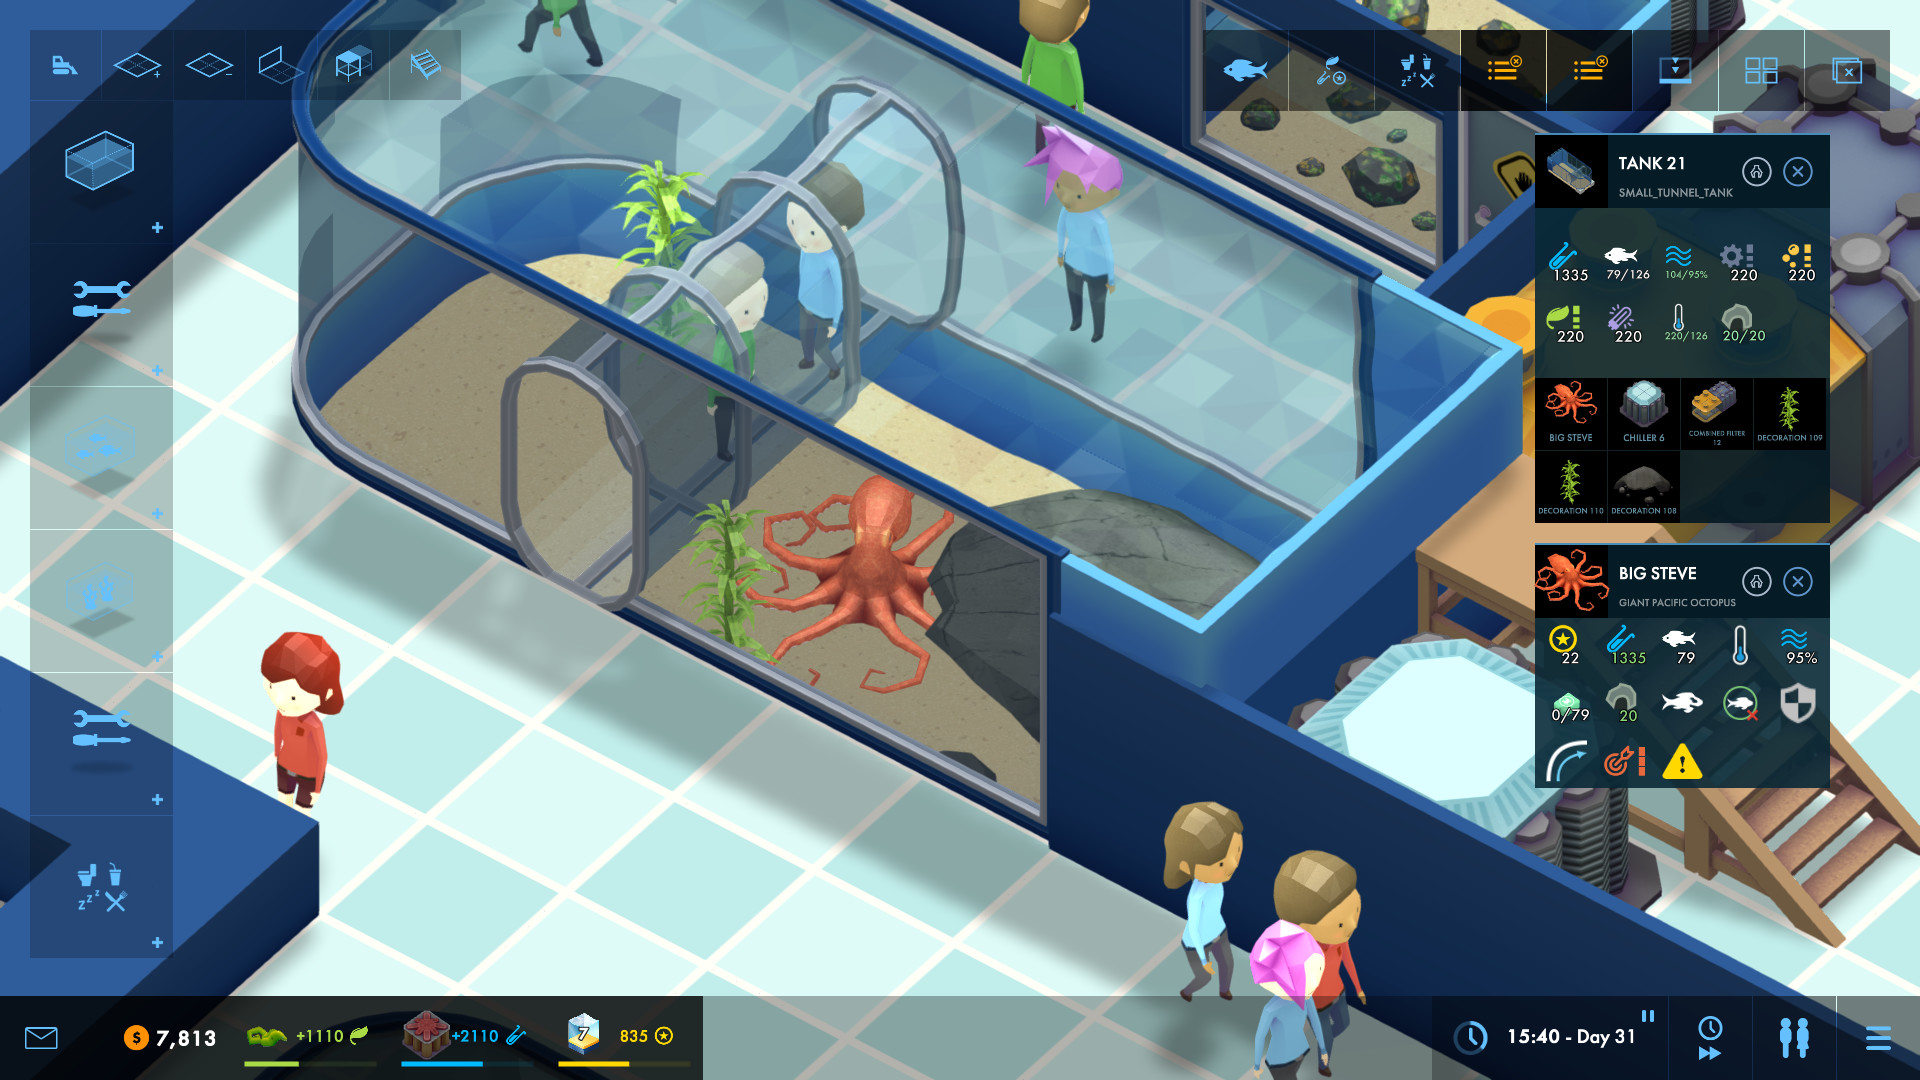 Top business simulation Steam games worth checking out